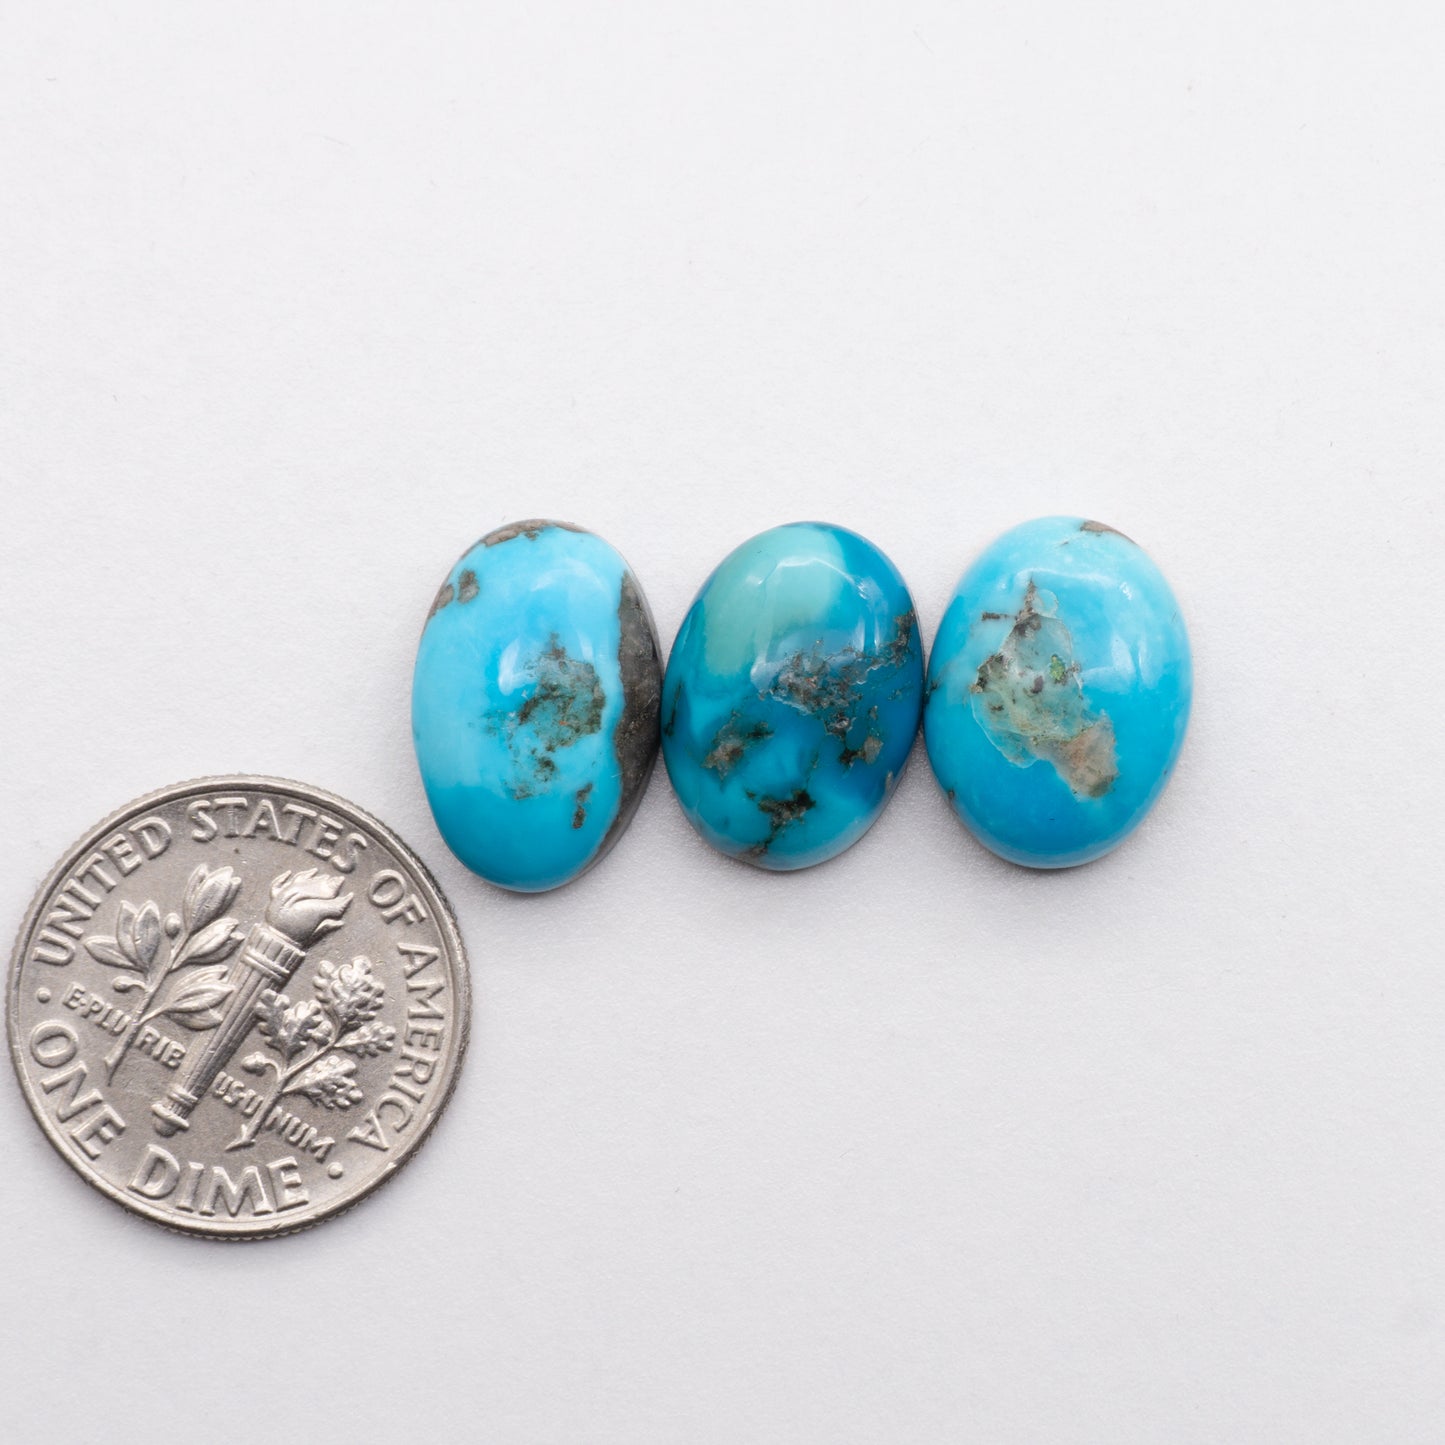 Add unique splashes of color to your jewelry with our Kingman Turquoise Cabochons. Featuring natural blue hues, these cabochons offer a beautiful contrast to any design. Perfect for necklaces, earrings, and more!